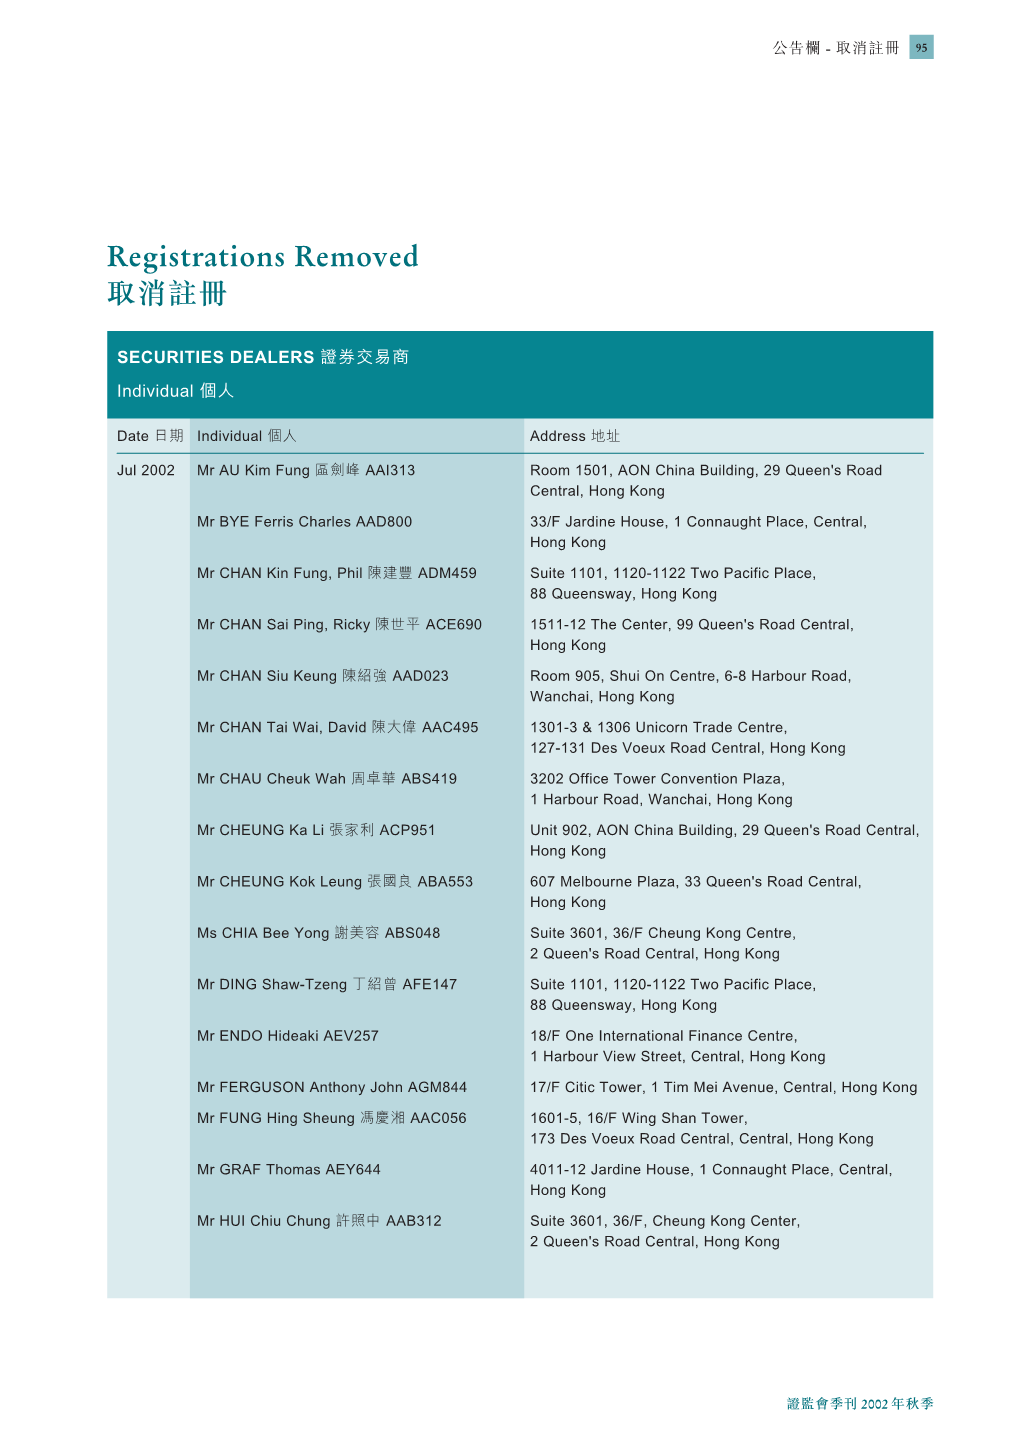 Registrations Removed 取消註冊